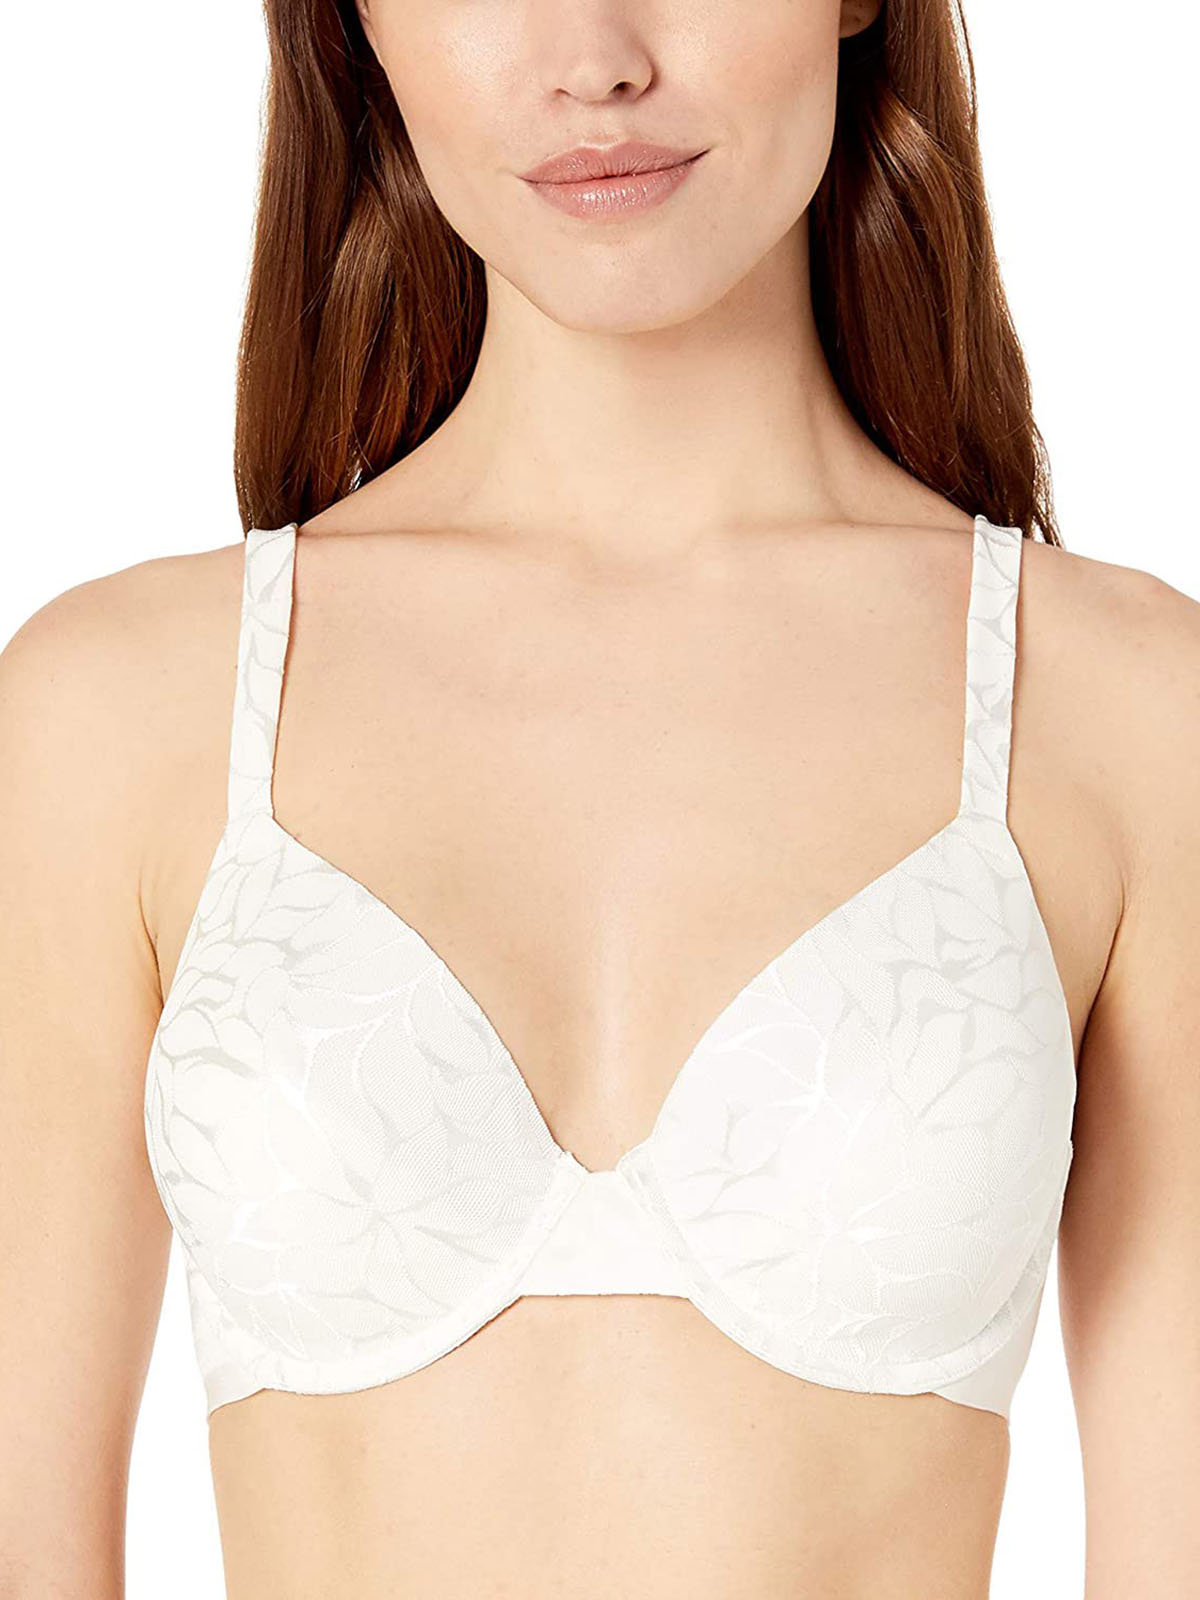 Bali IVORY Beauty Lift Invisible Support Underwire Bra - Size 38